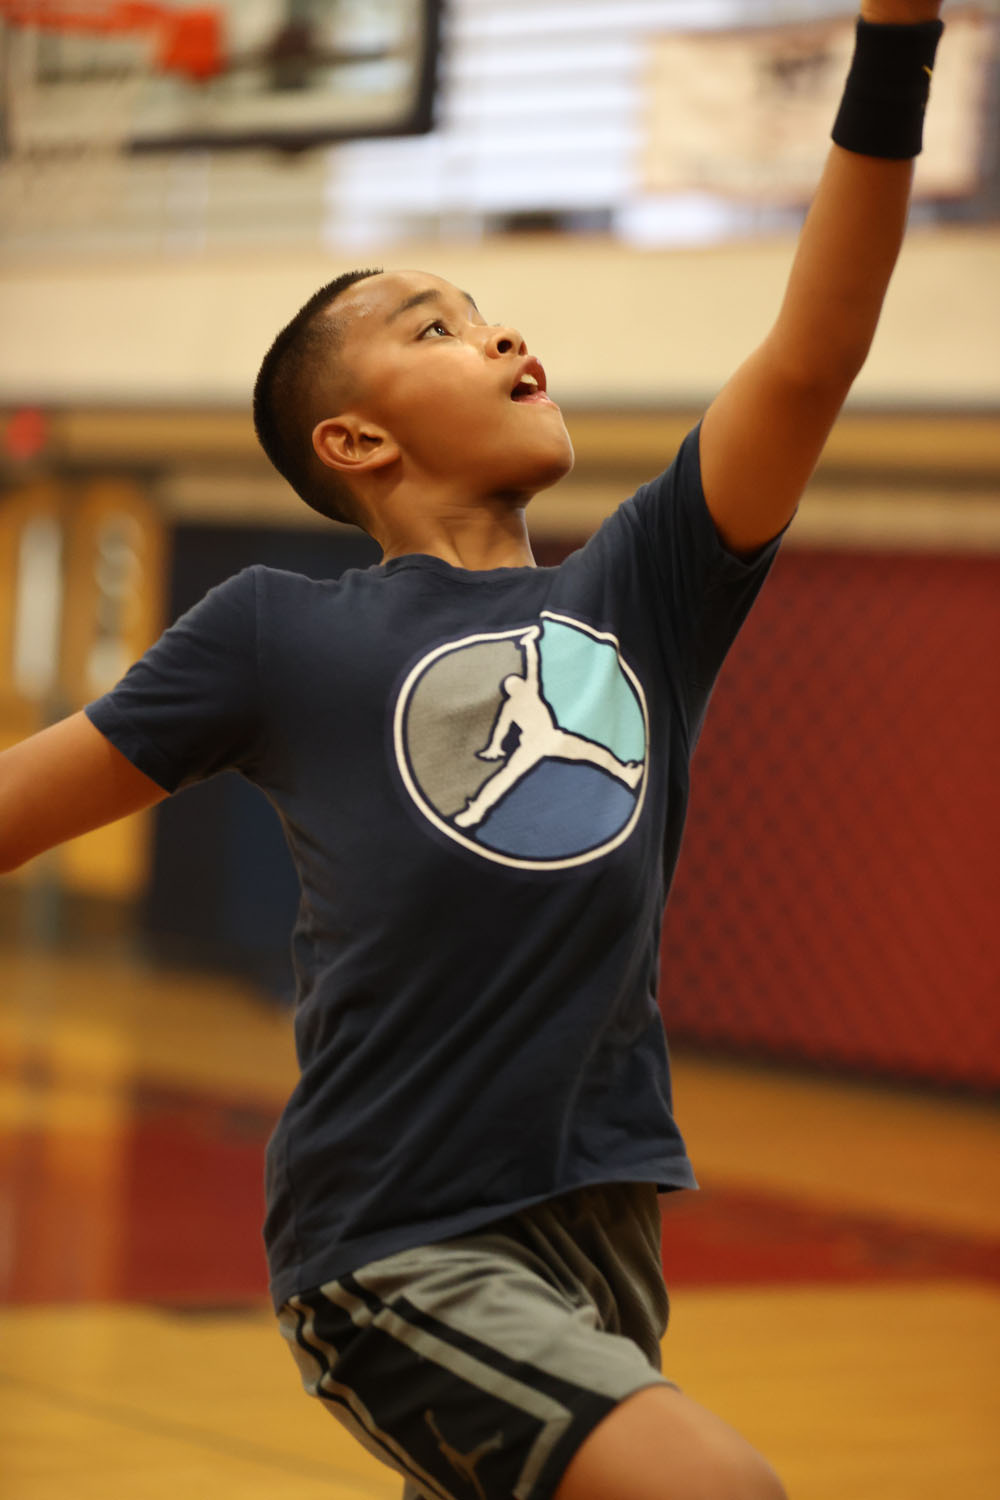 A camper going in for a layup